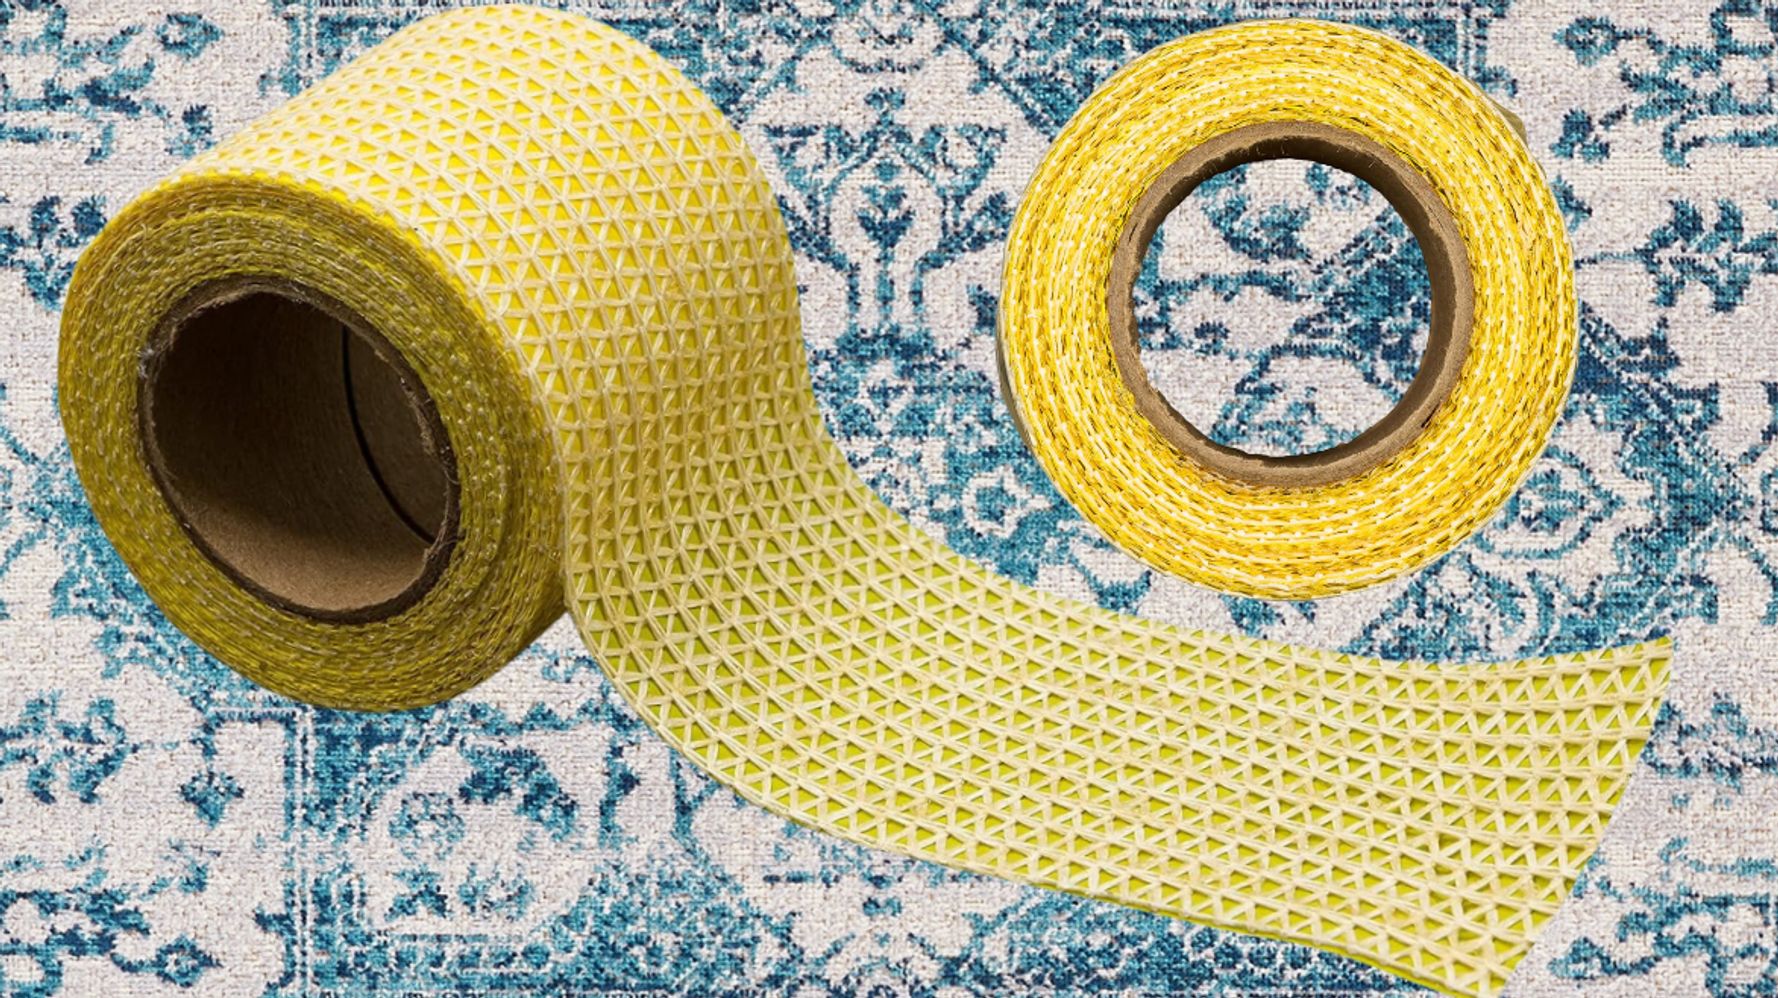 Rug Pad Grippers: Prevent Slipping and Sliding with This $12 Hack